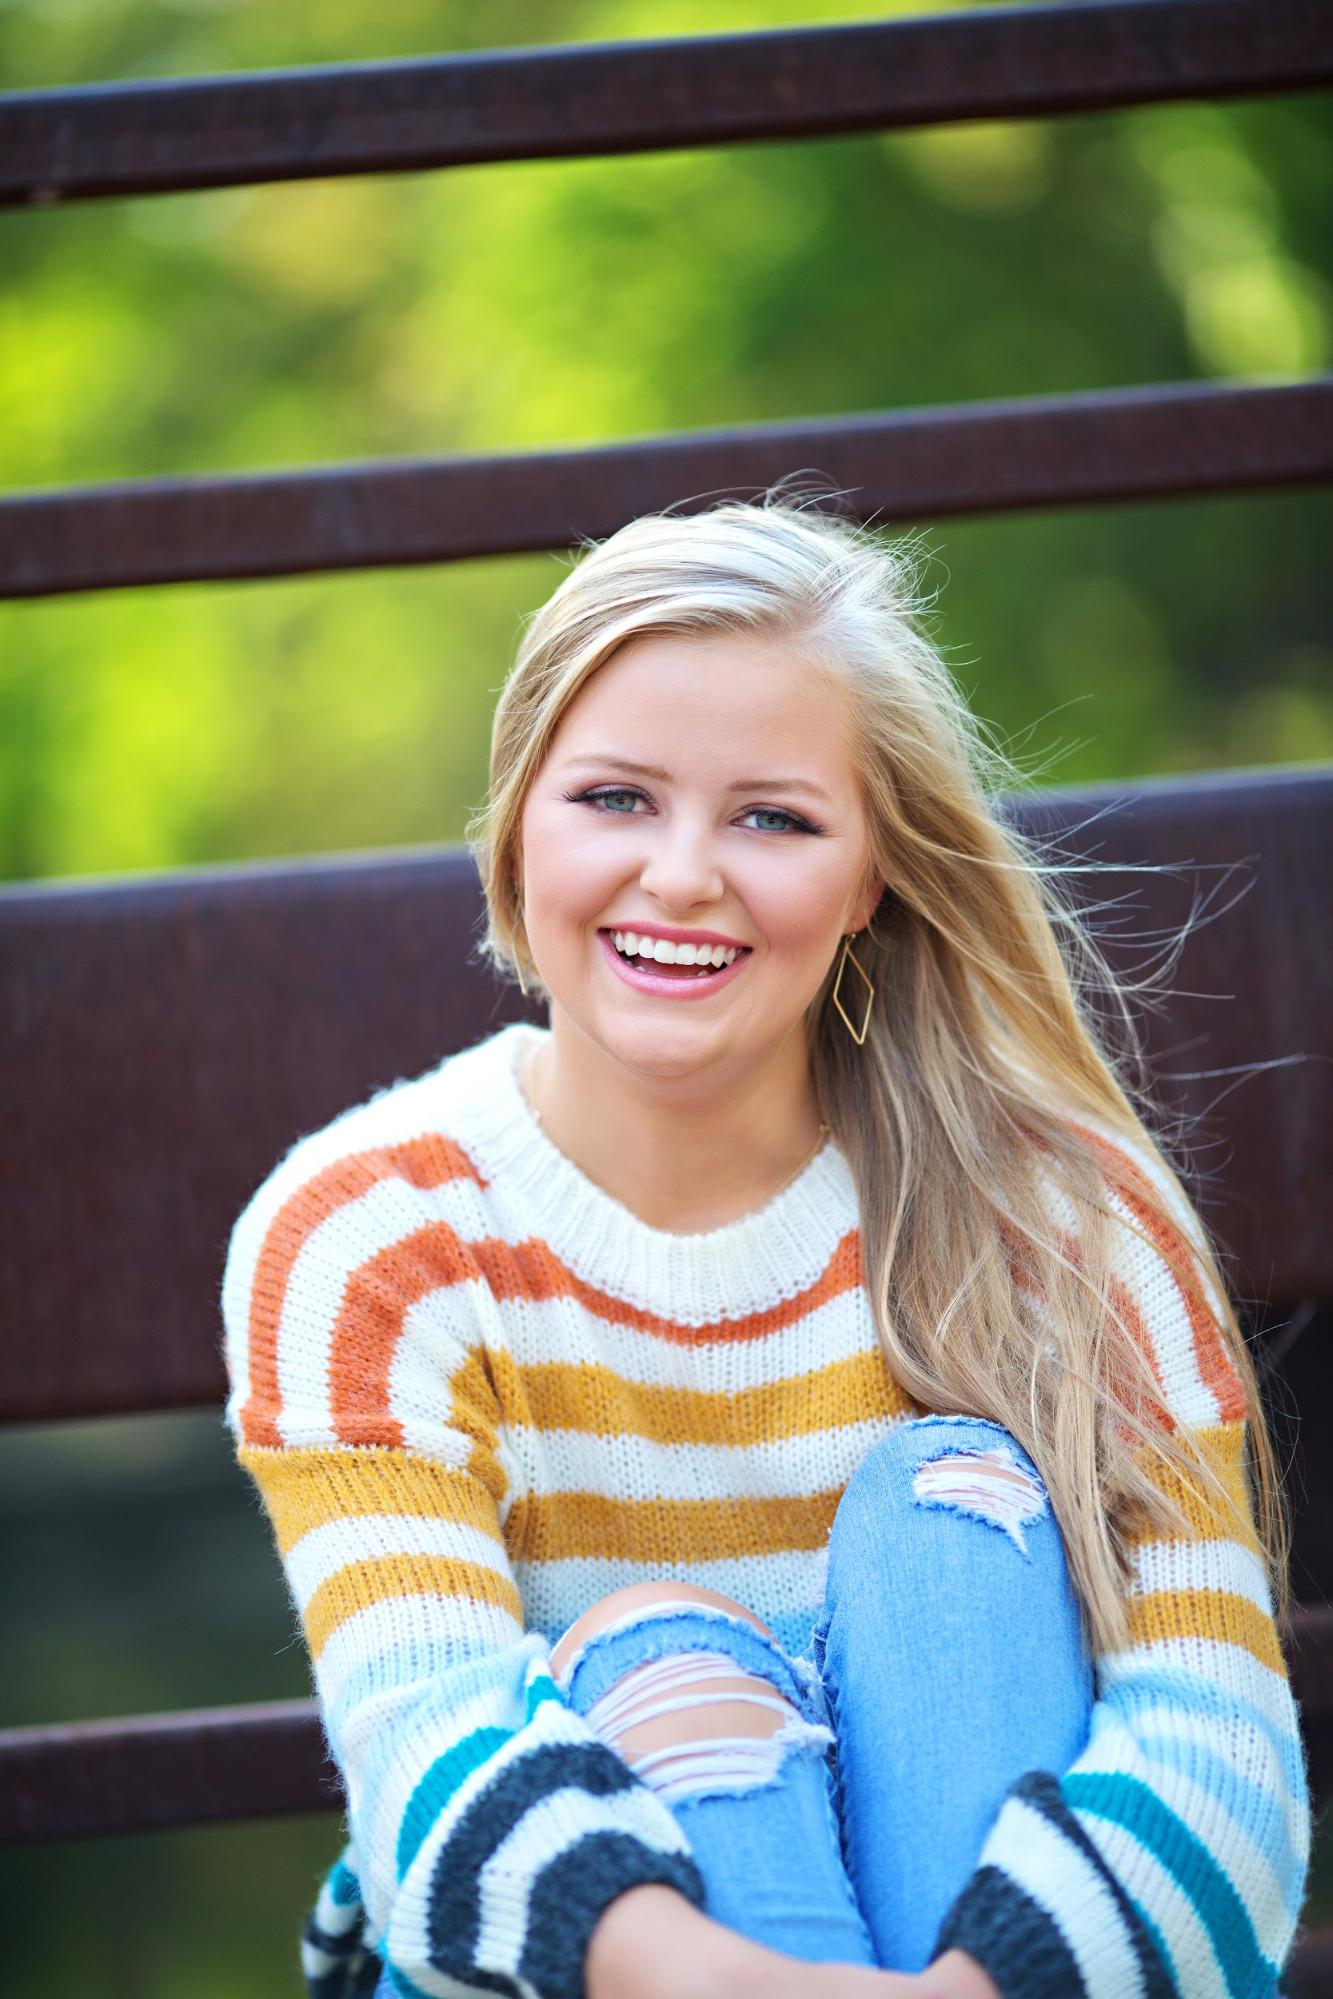 Portrait of girl smiling wearing a striped sweater